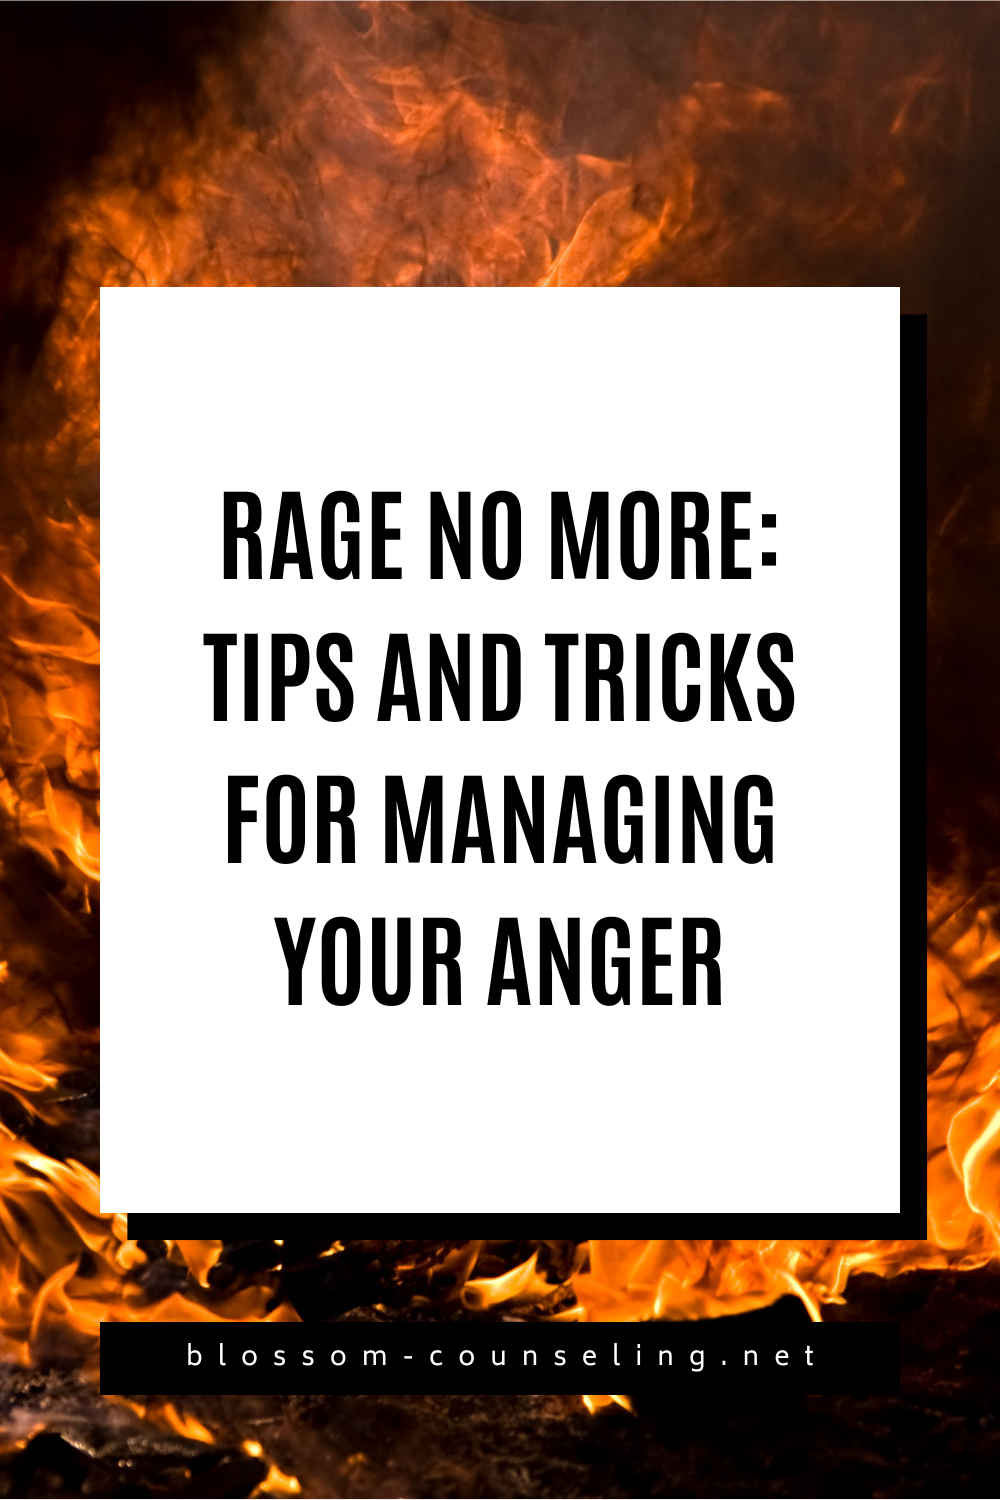 Rage No More: Tips and Tricks for Managing Your Anger